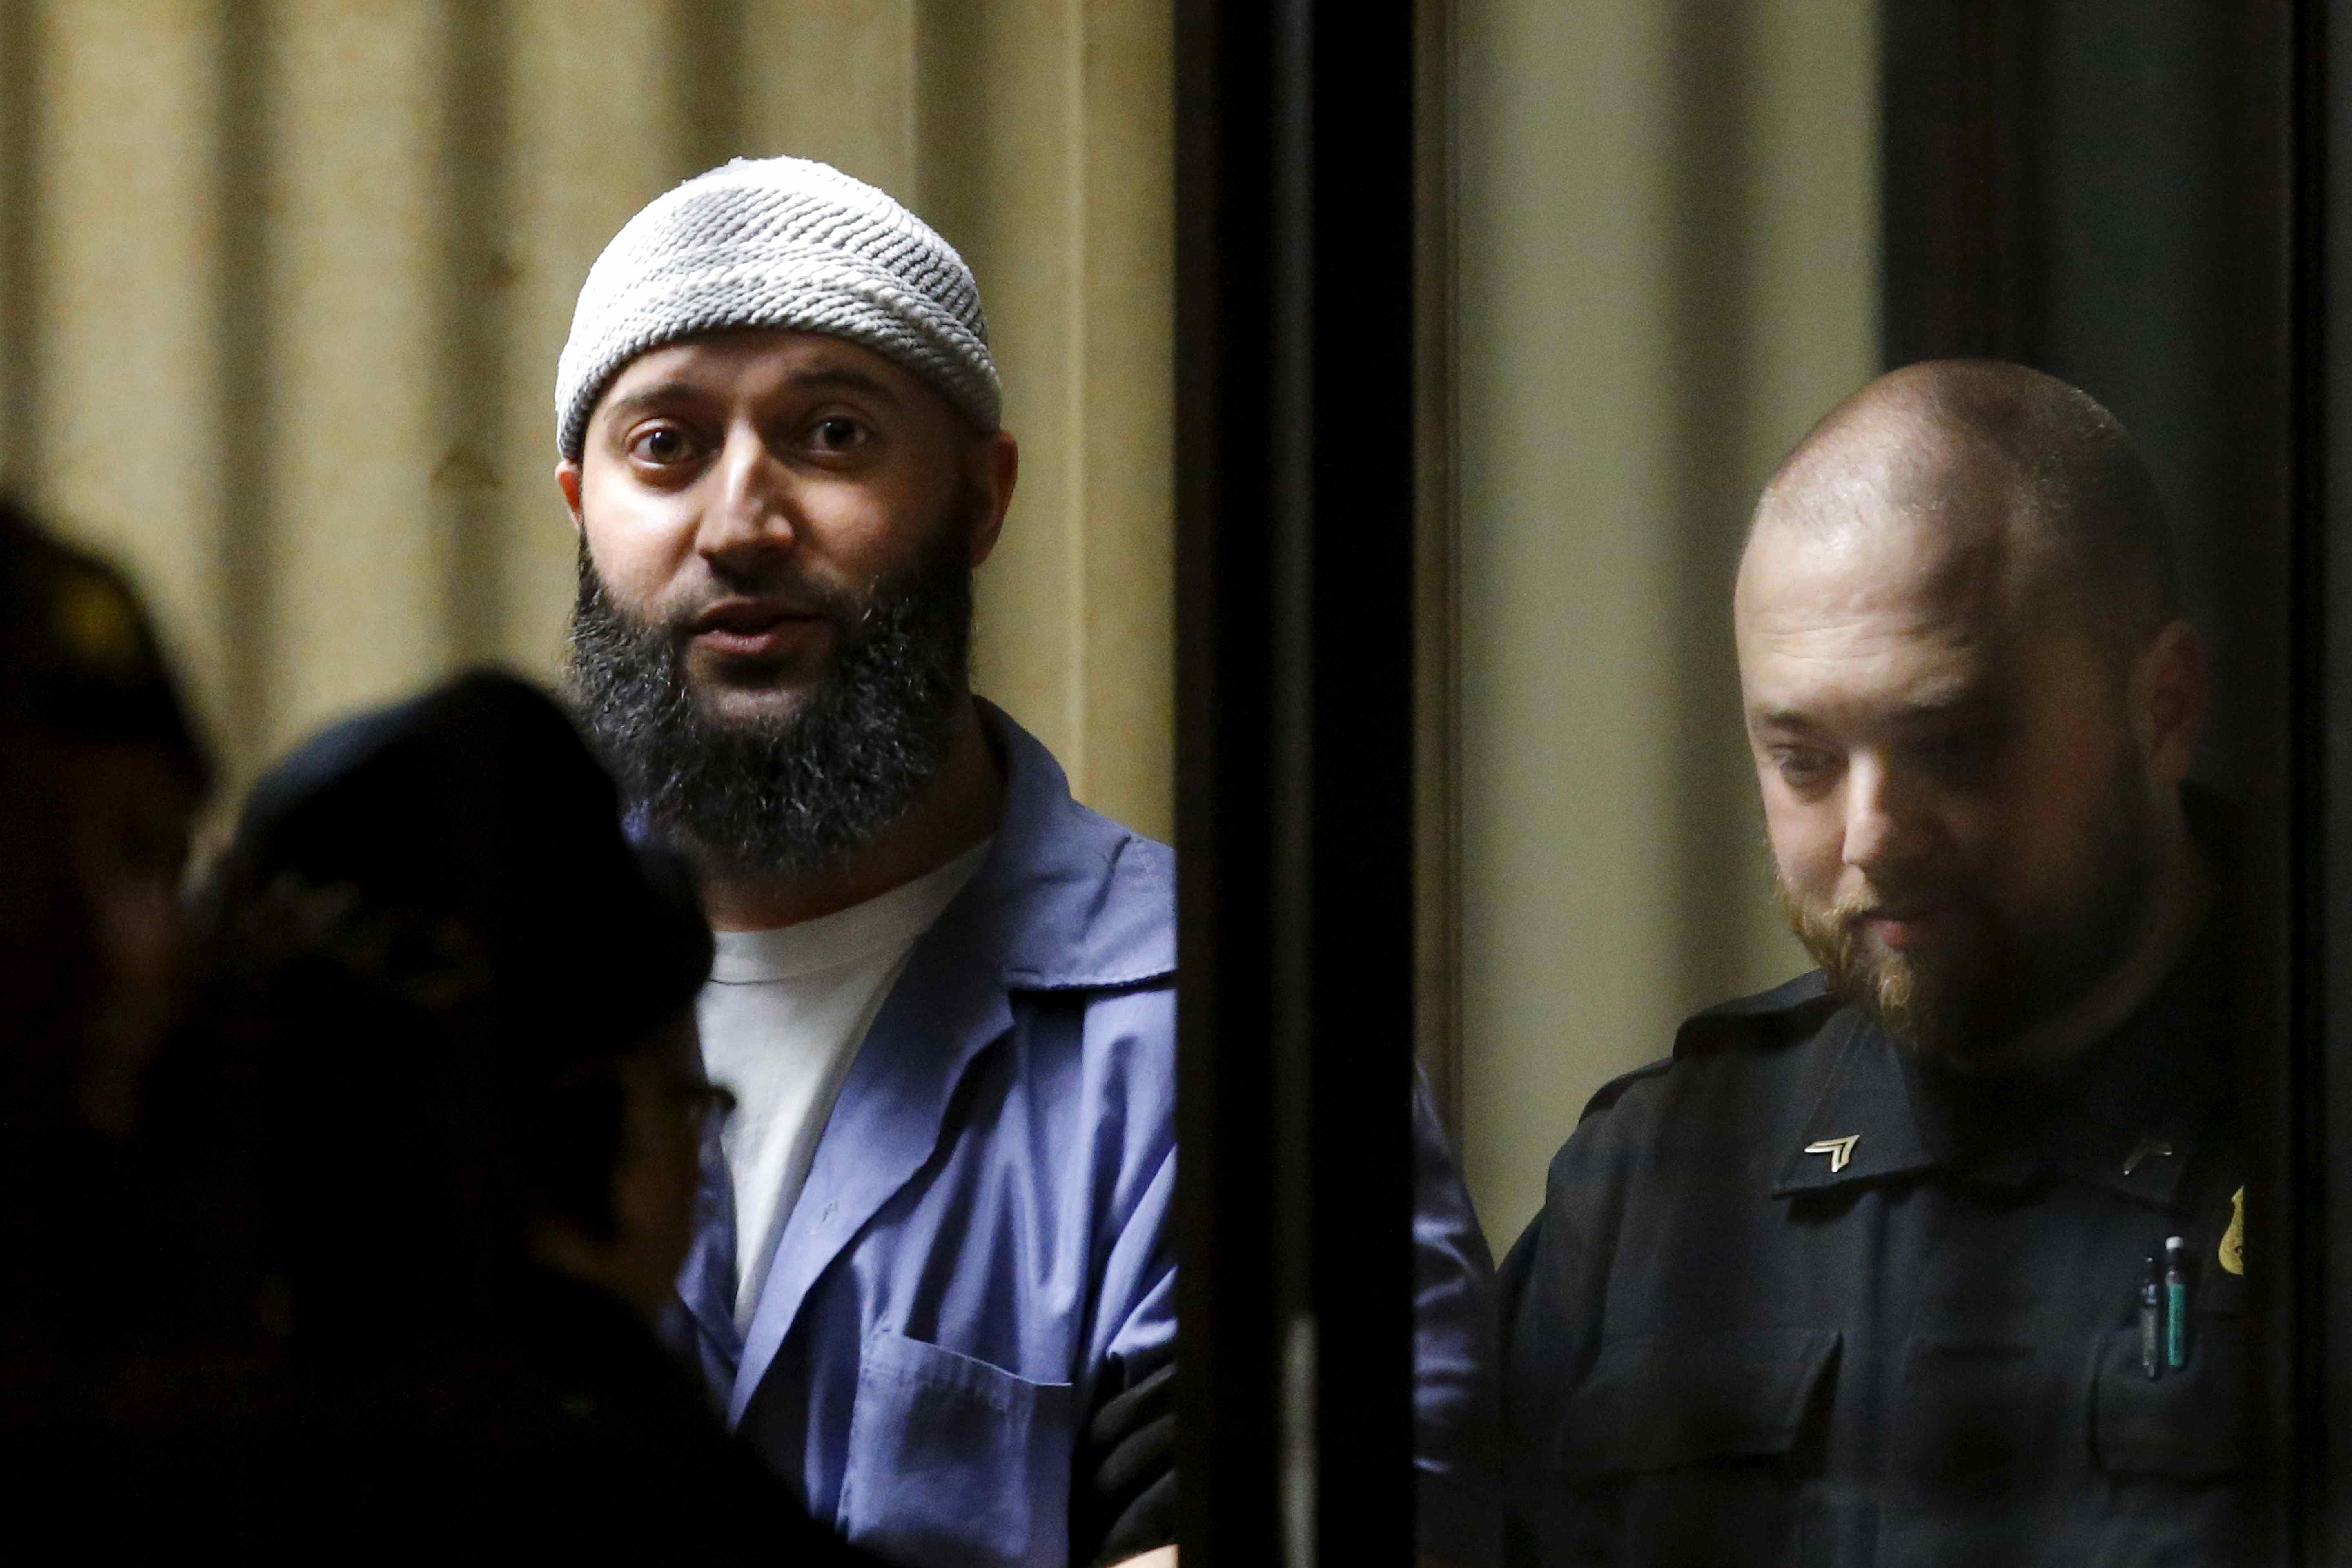 Adnan Syed leaves the Baltimore City Circuit Courthouse in Baltimore, Maryland, on 5 February 2016